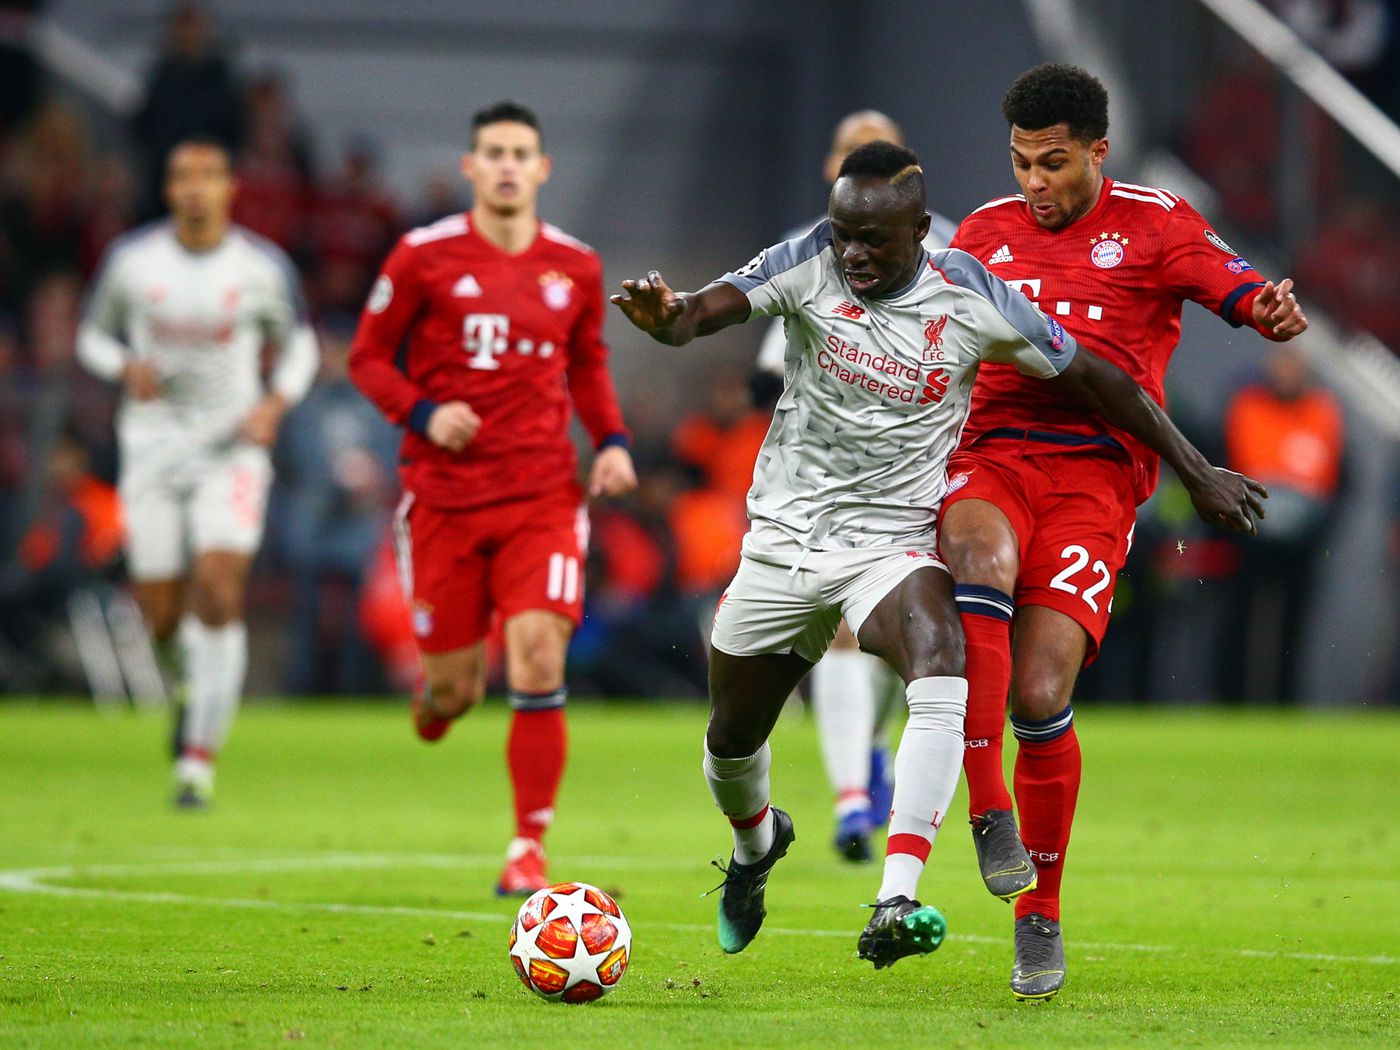 Premier League Transfers: Liverpool star Sadio Mane set to join Bundesliga giants Bayern Munich for a potential €40m fee, Deal agreed until 2025